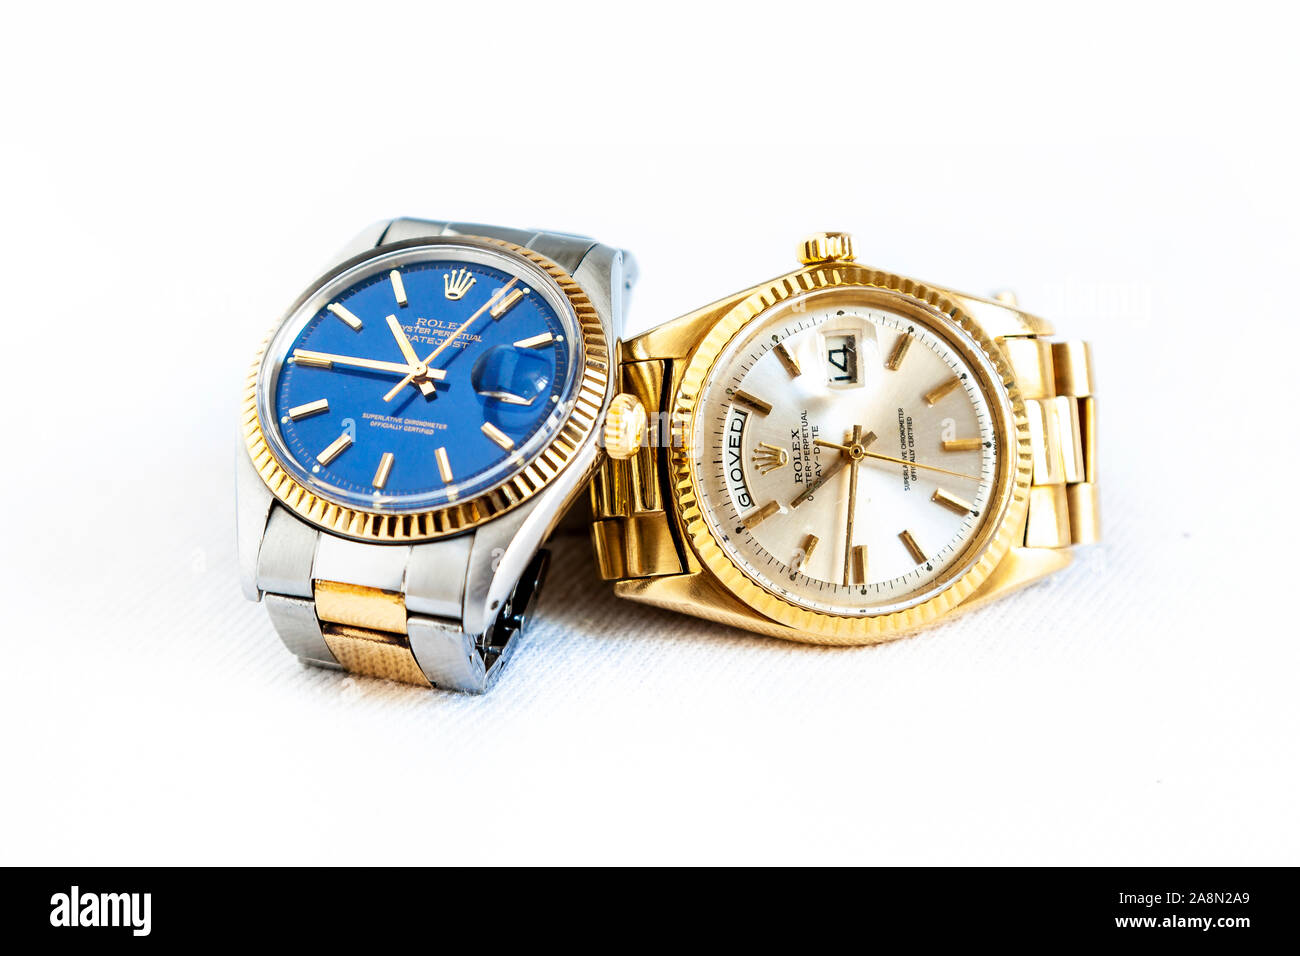 ITALY - MARCH, 2019: Rolex Oyster Perpetual Day- Date and Blue watch on white background. Rolex SA is an important Swiss compa Stock Photo - Alamy